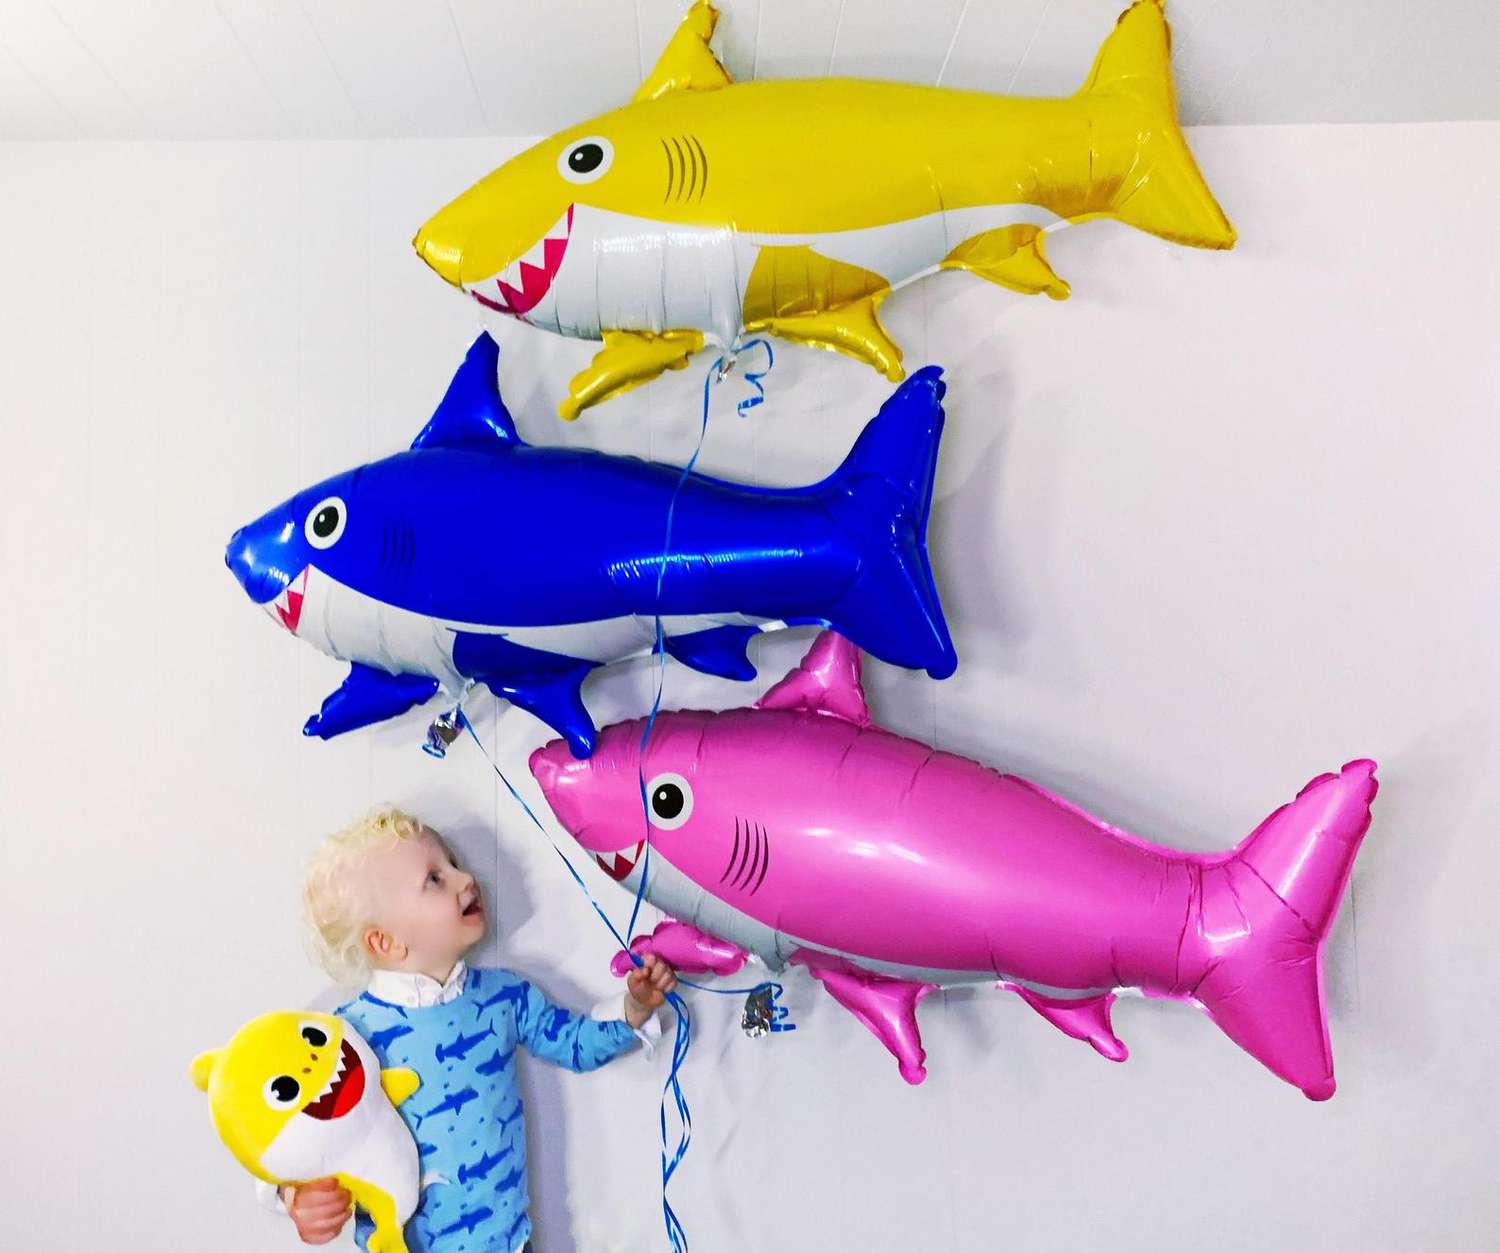 15 Baby Shark Birthday Party Ideas We Love Parents - amazon com 12 gift bags for roblox party bags birthday decorations party bags supplies set for children health personal care